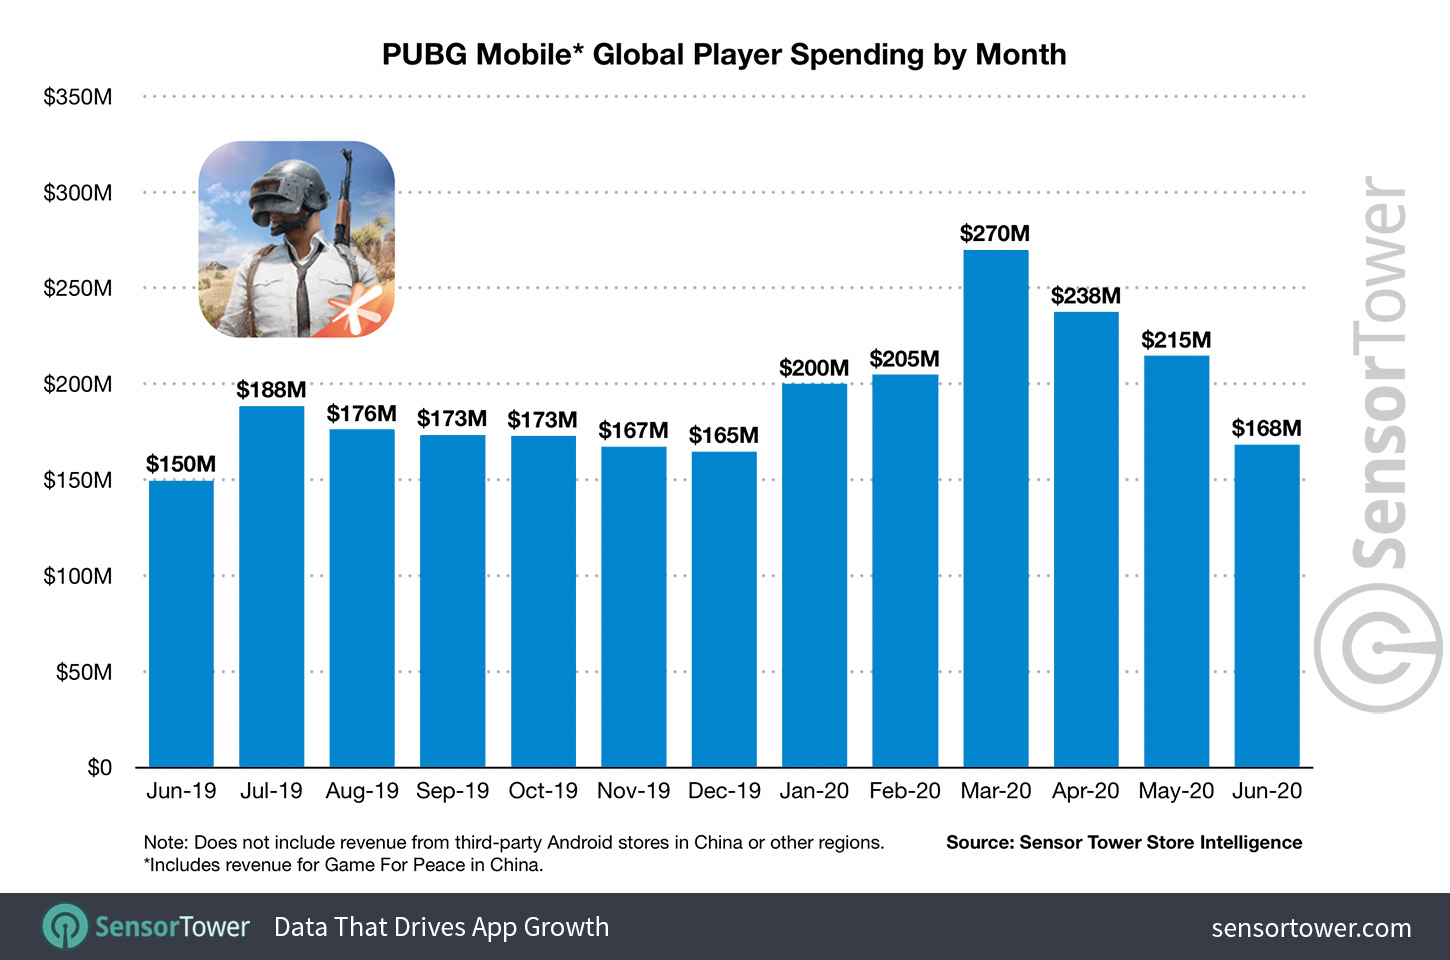 PUBG Player Count Reaches New Heights, 1.8 Million Concurrent